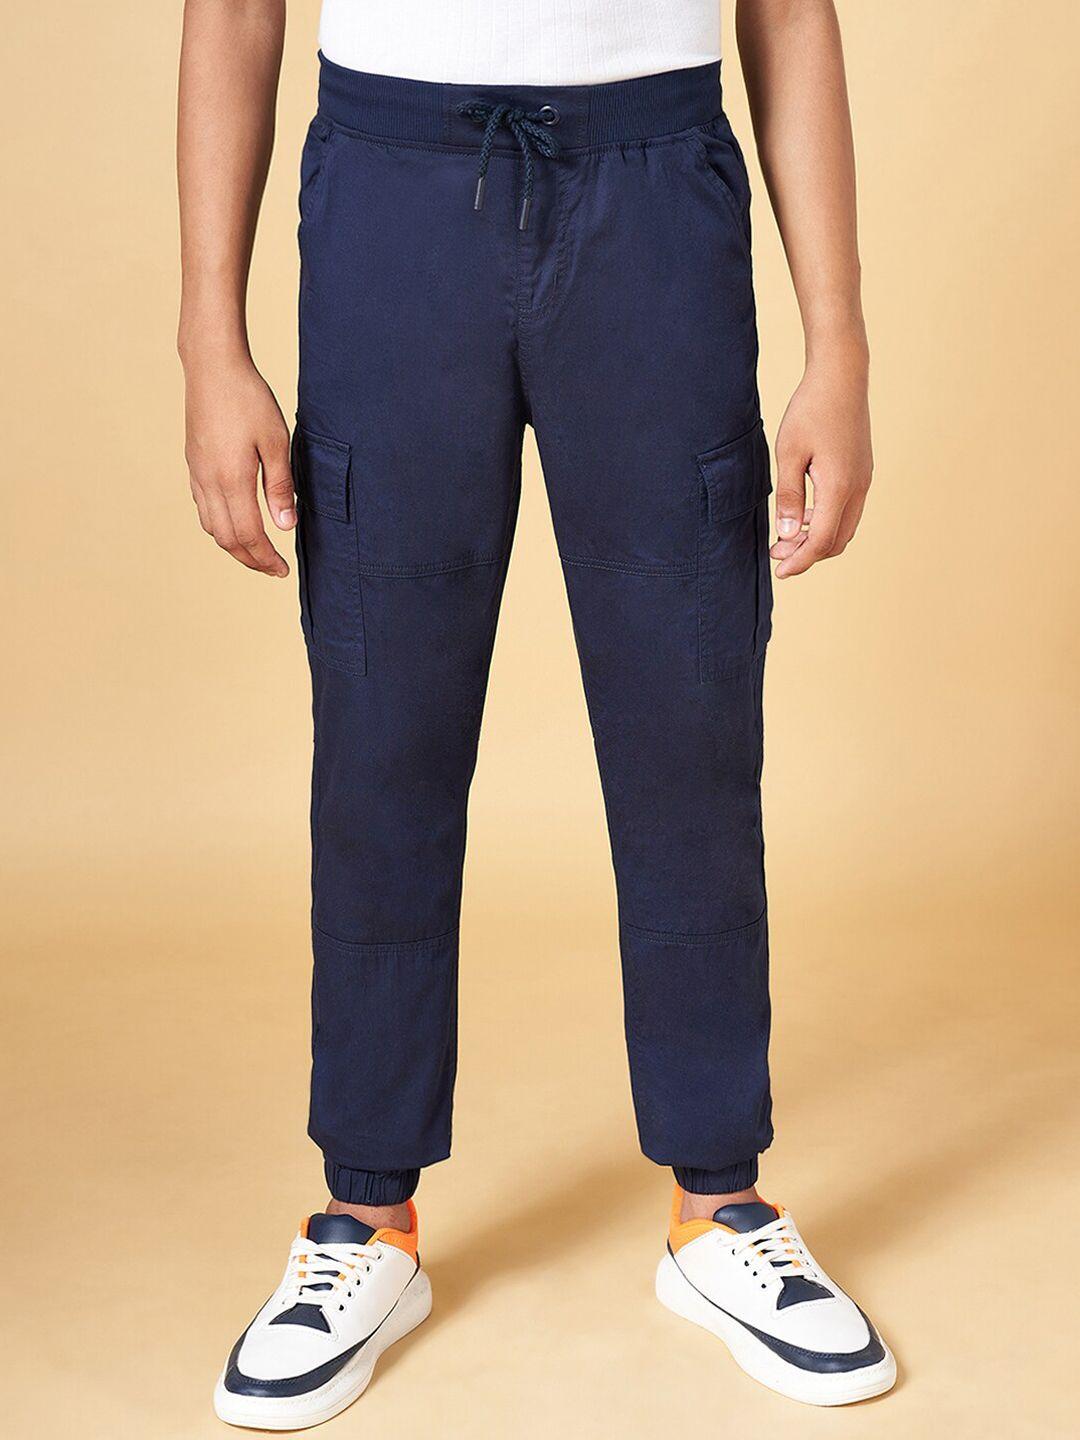 coolsters by pantaloons boys pure cotton joggers